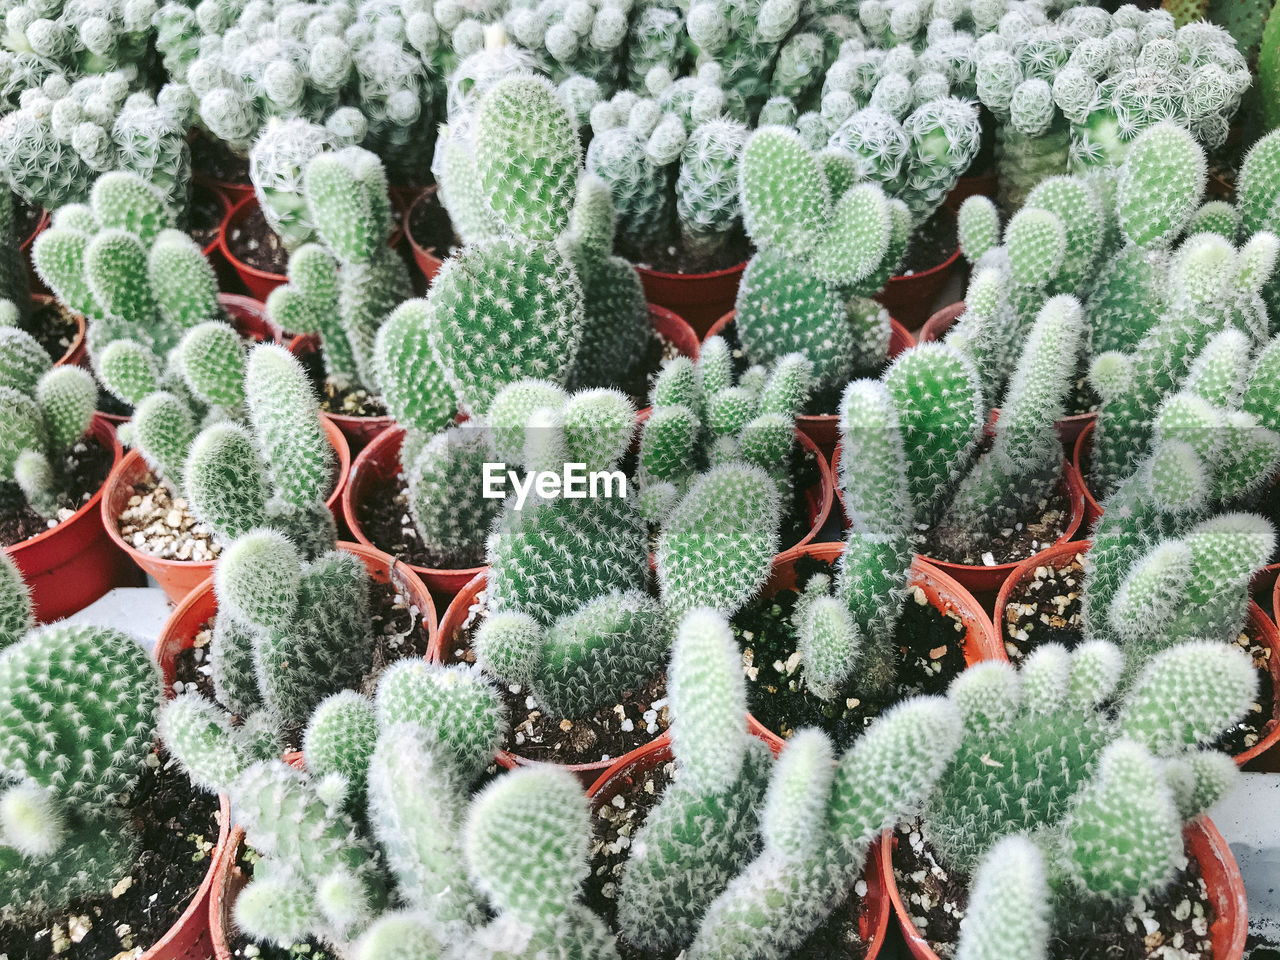 HIGH ANGLE VIEW OF SUCCULENT PLANT